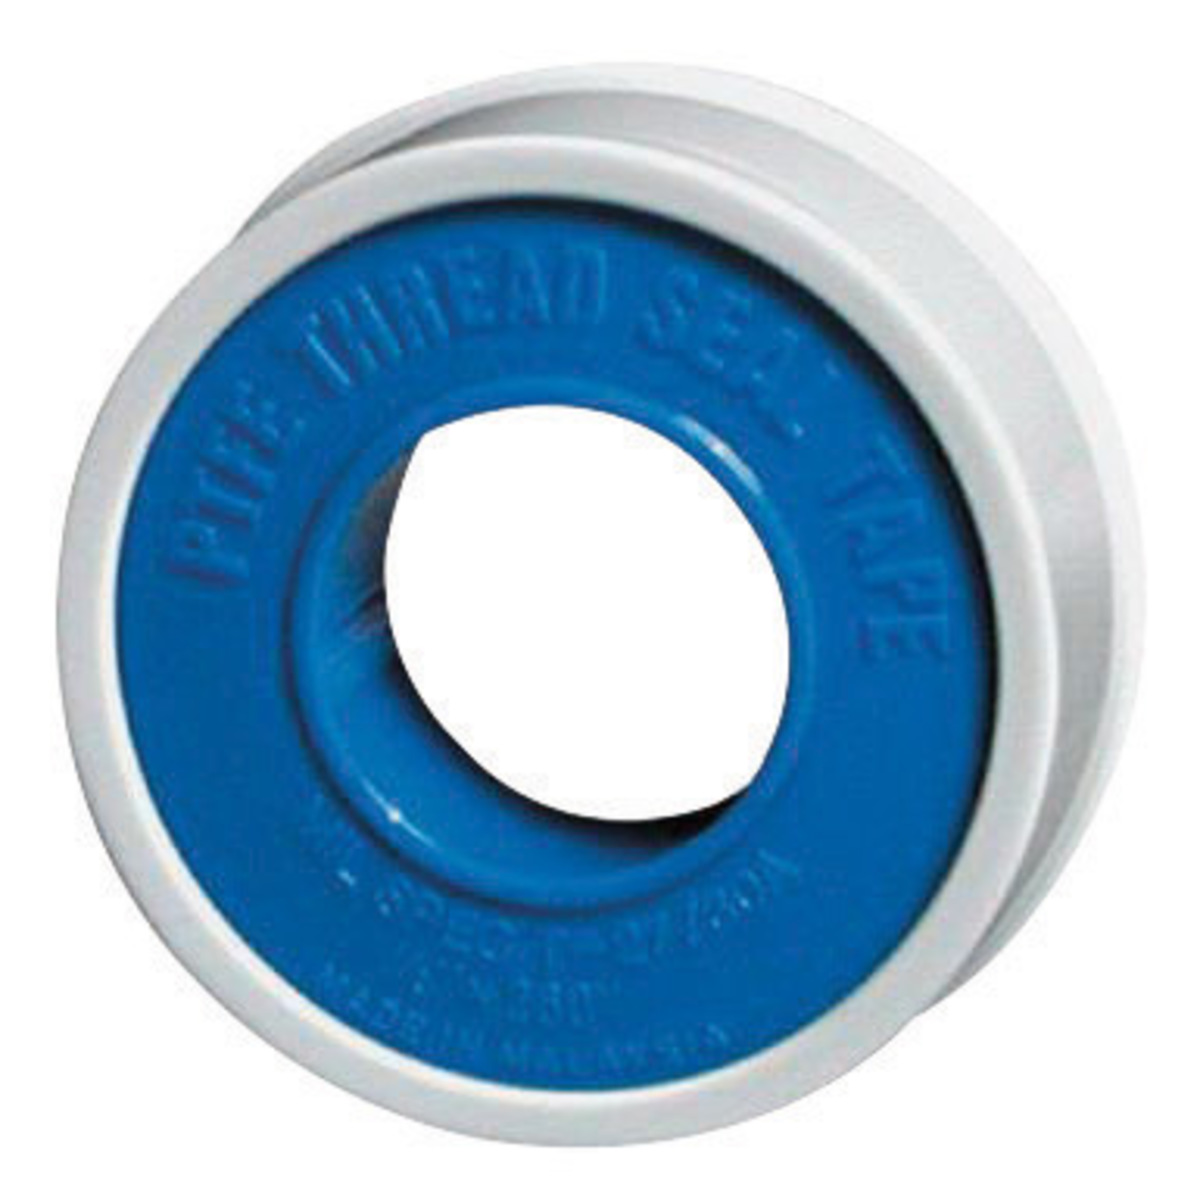 PFTE teflon sealing tape - Cablematic